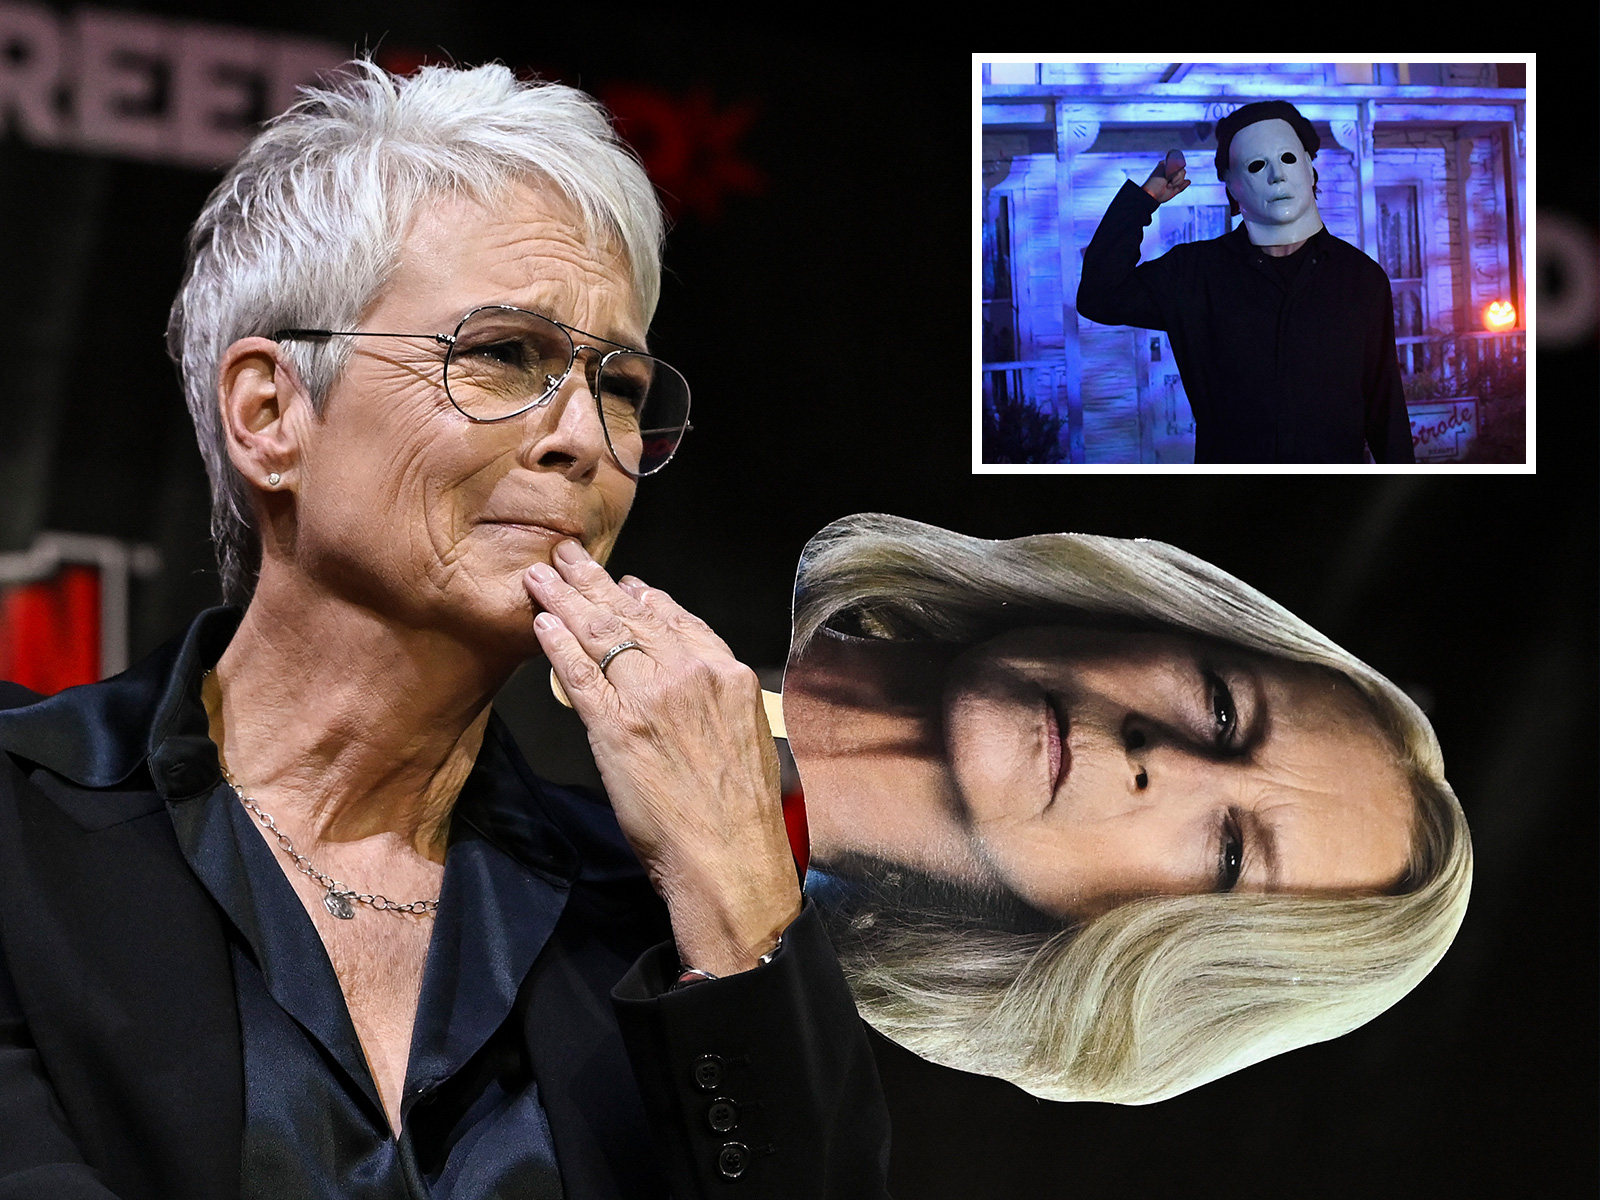 Jamie Lee Curtis in Tears as She Bids Farewell to Her 'Halloween' 'Legacy'